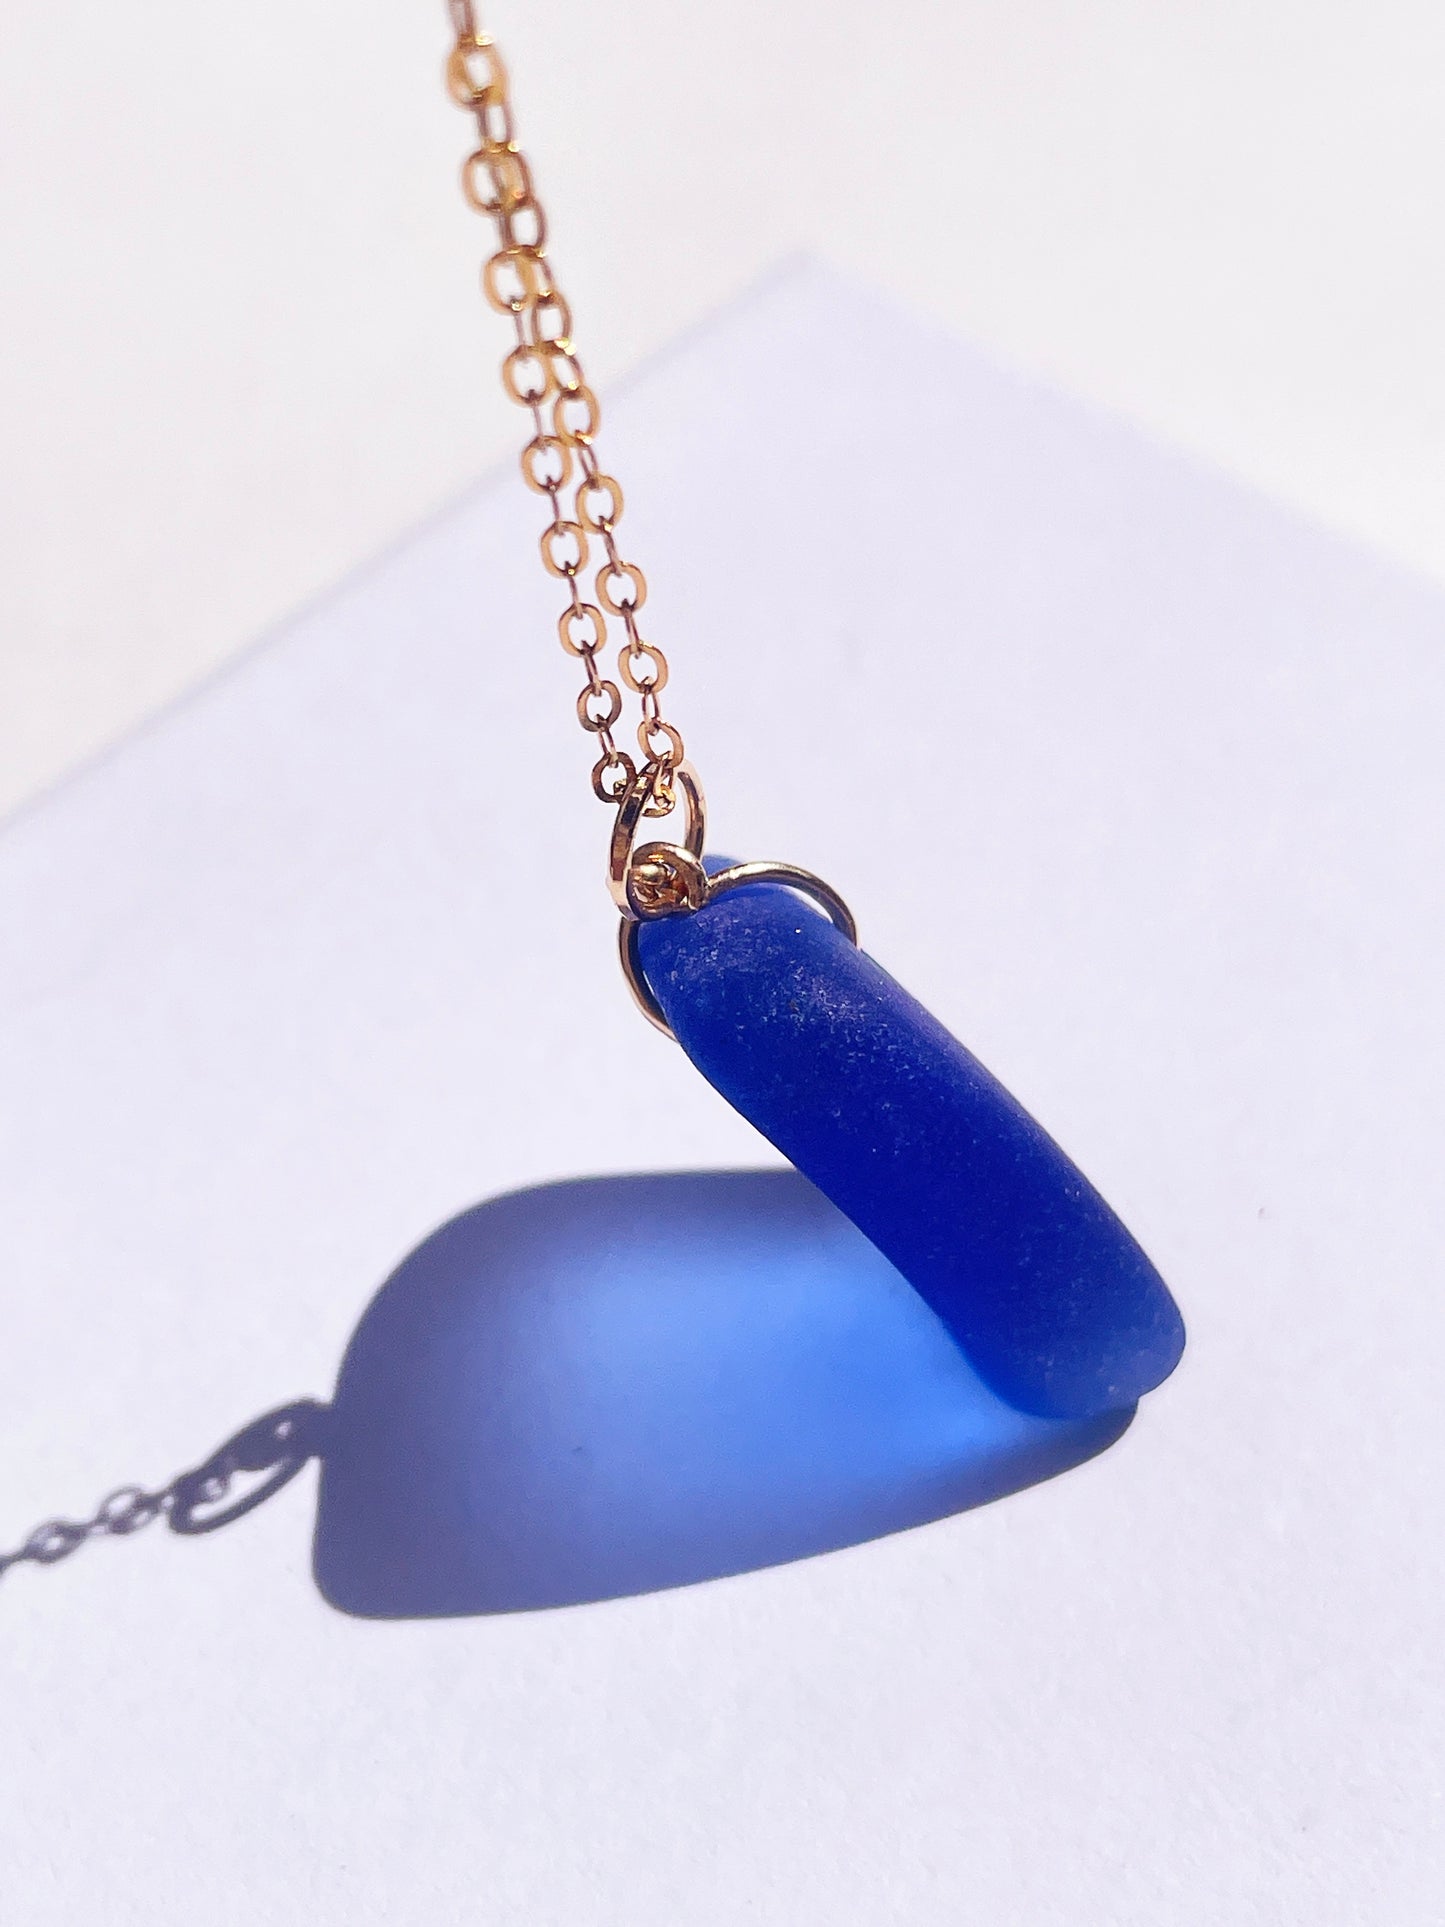 Authentic Dark Blue Sea-Glass Pendant Necklace with 14k Gold Filled Chain | Handmade and Unique